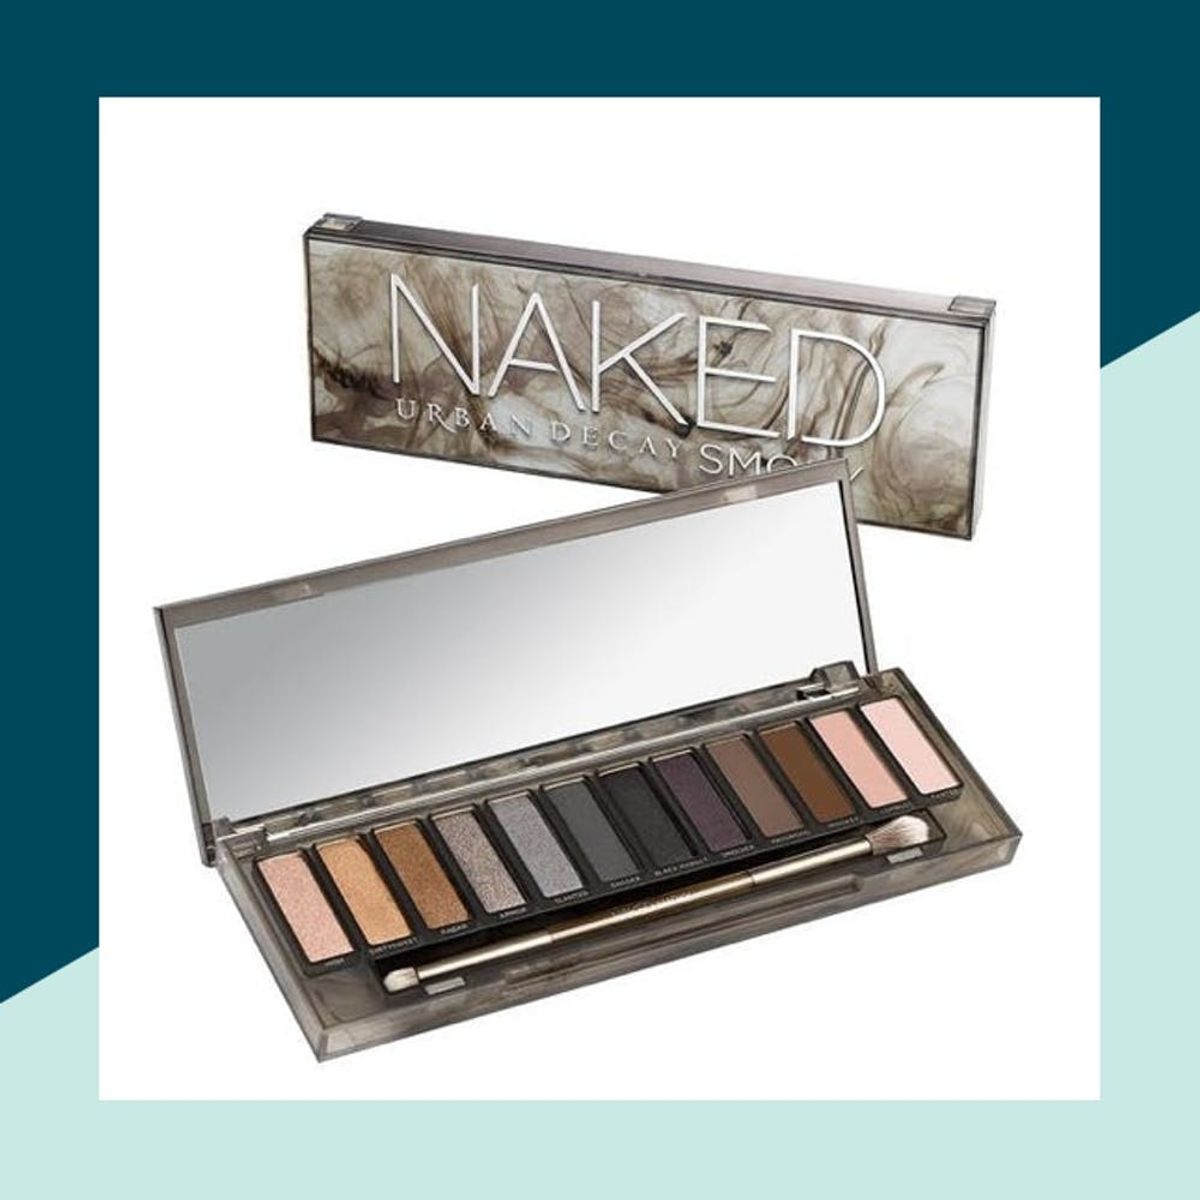 How to Score Urban Decay’s Naked Smoky Palette for Half Off